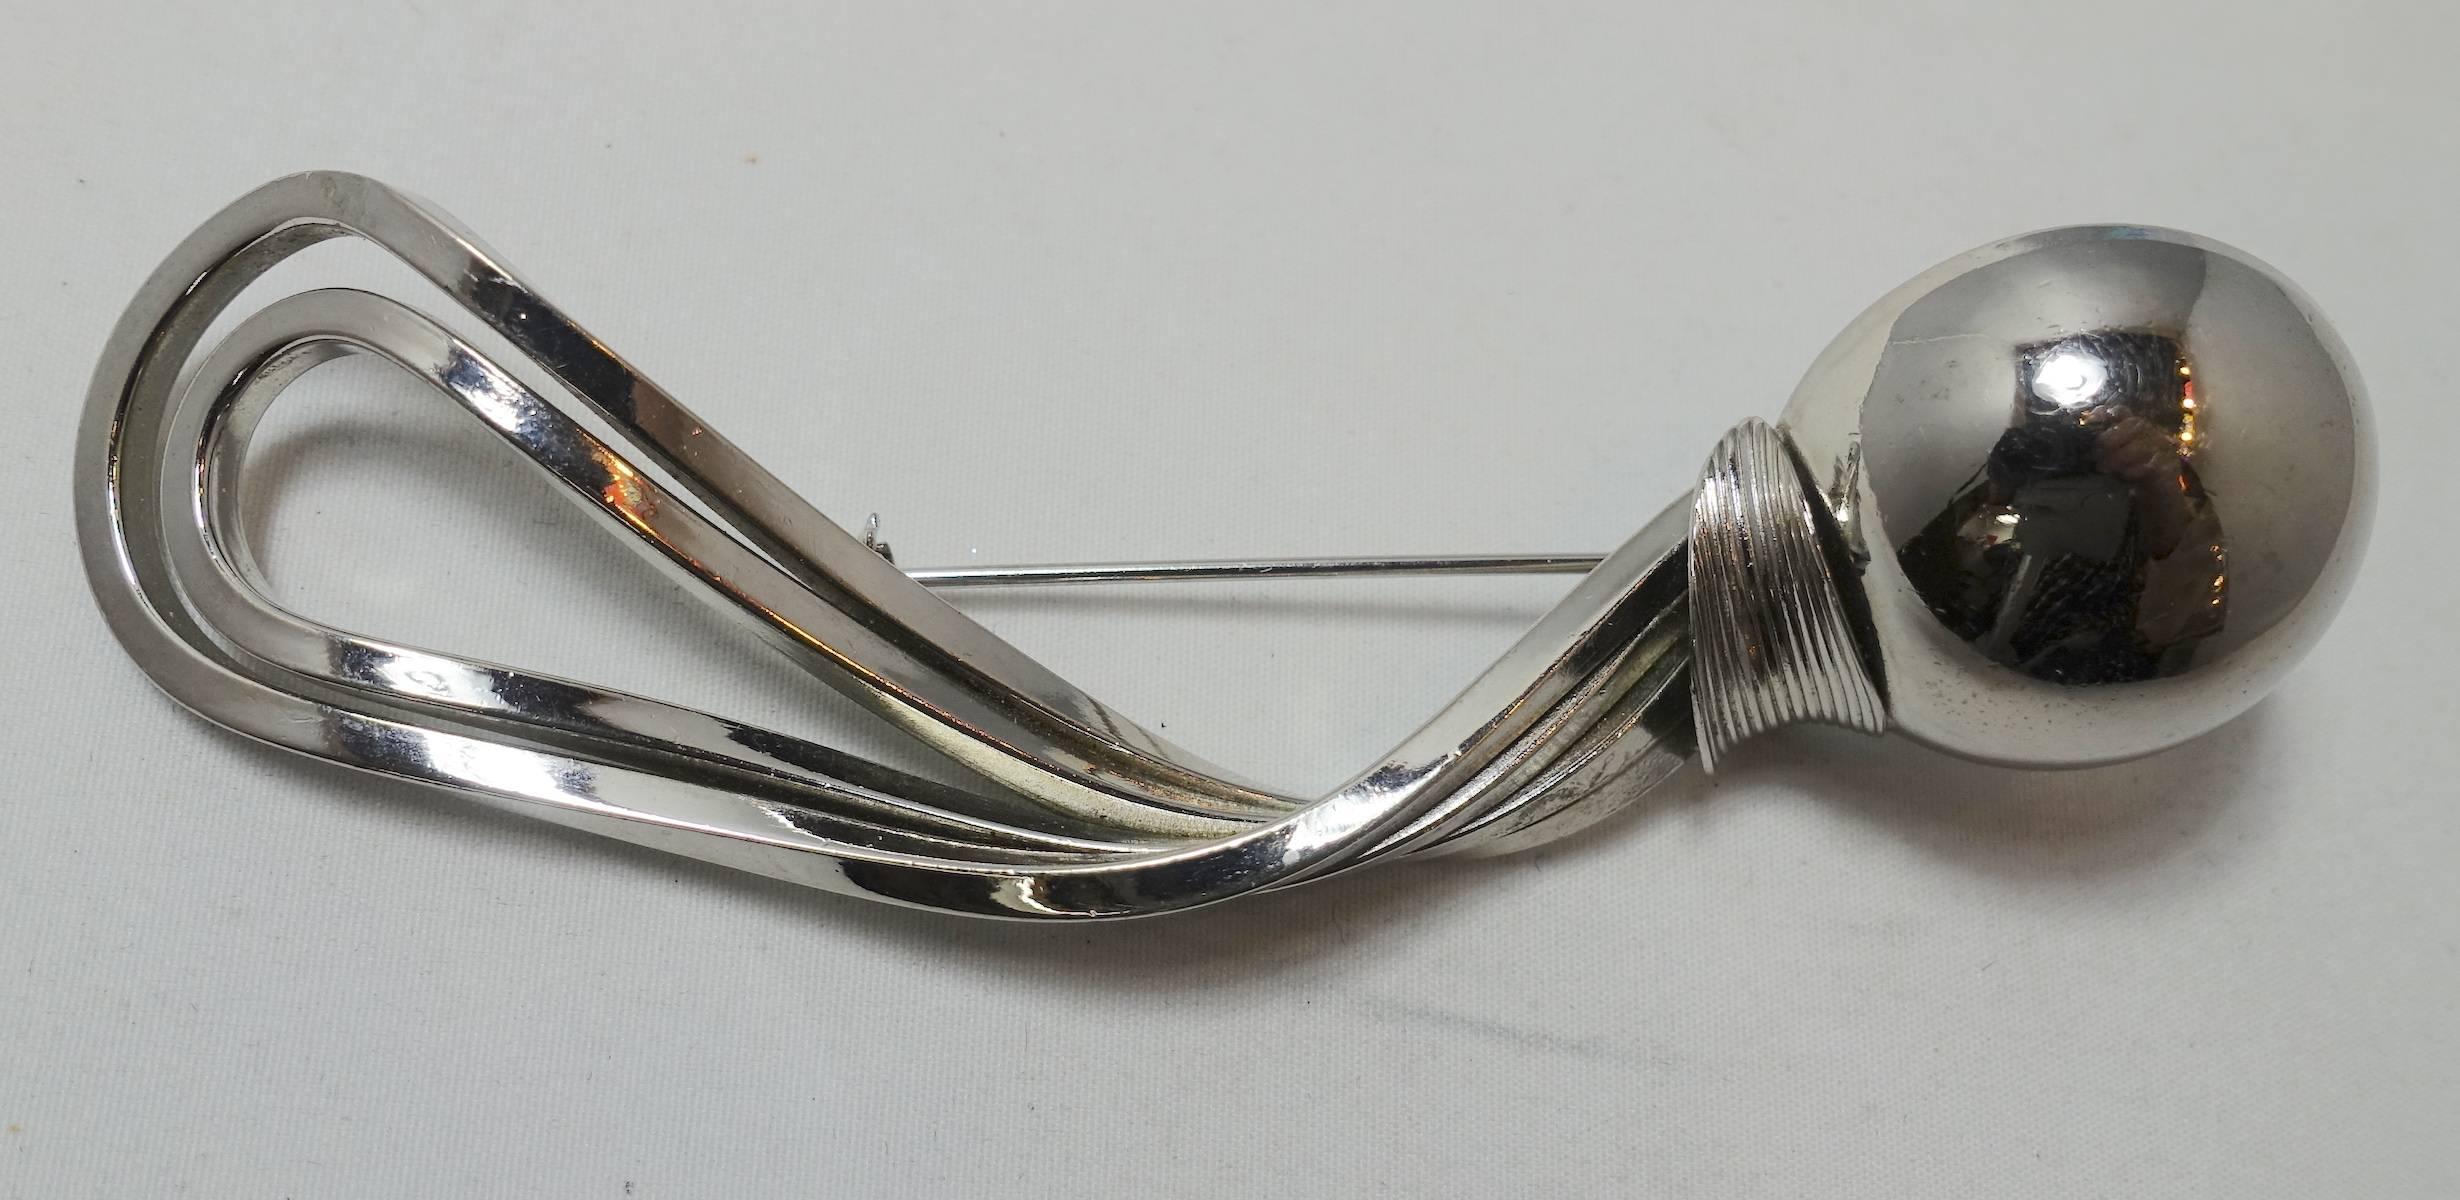 This vintage 1960s brooch features and abstract modernist design in a silver tone setting. In excellent condition, this brooch measures 4” x 1” and has a turn closure.